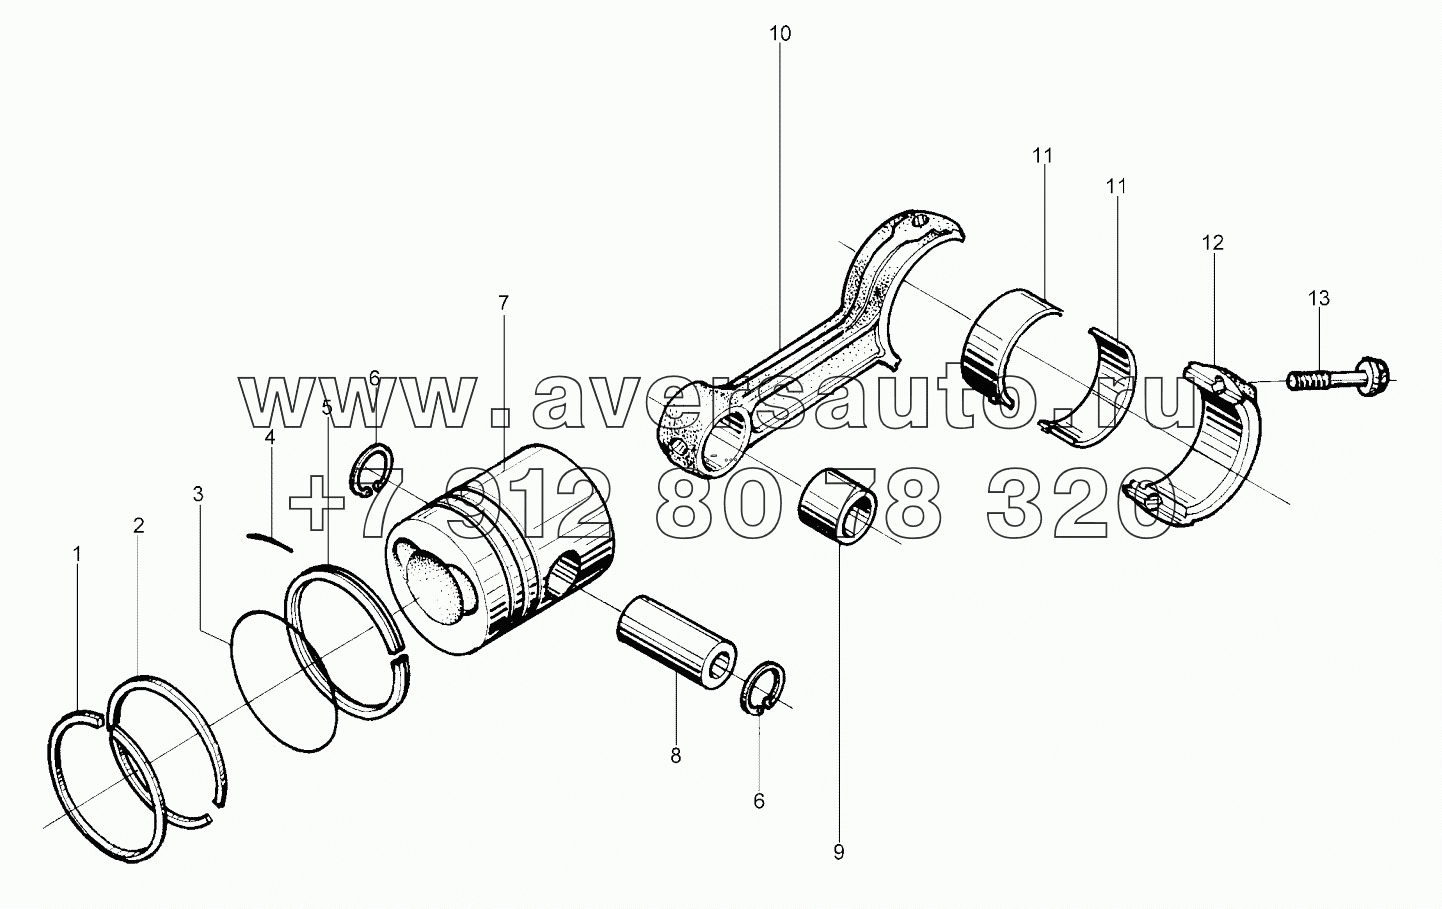  Piston connecting rod assembly